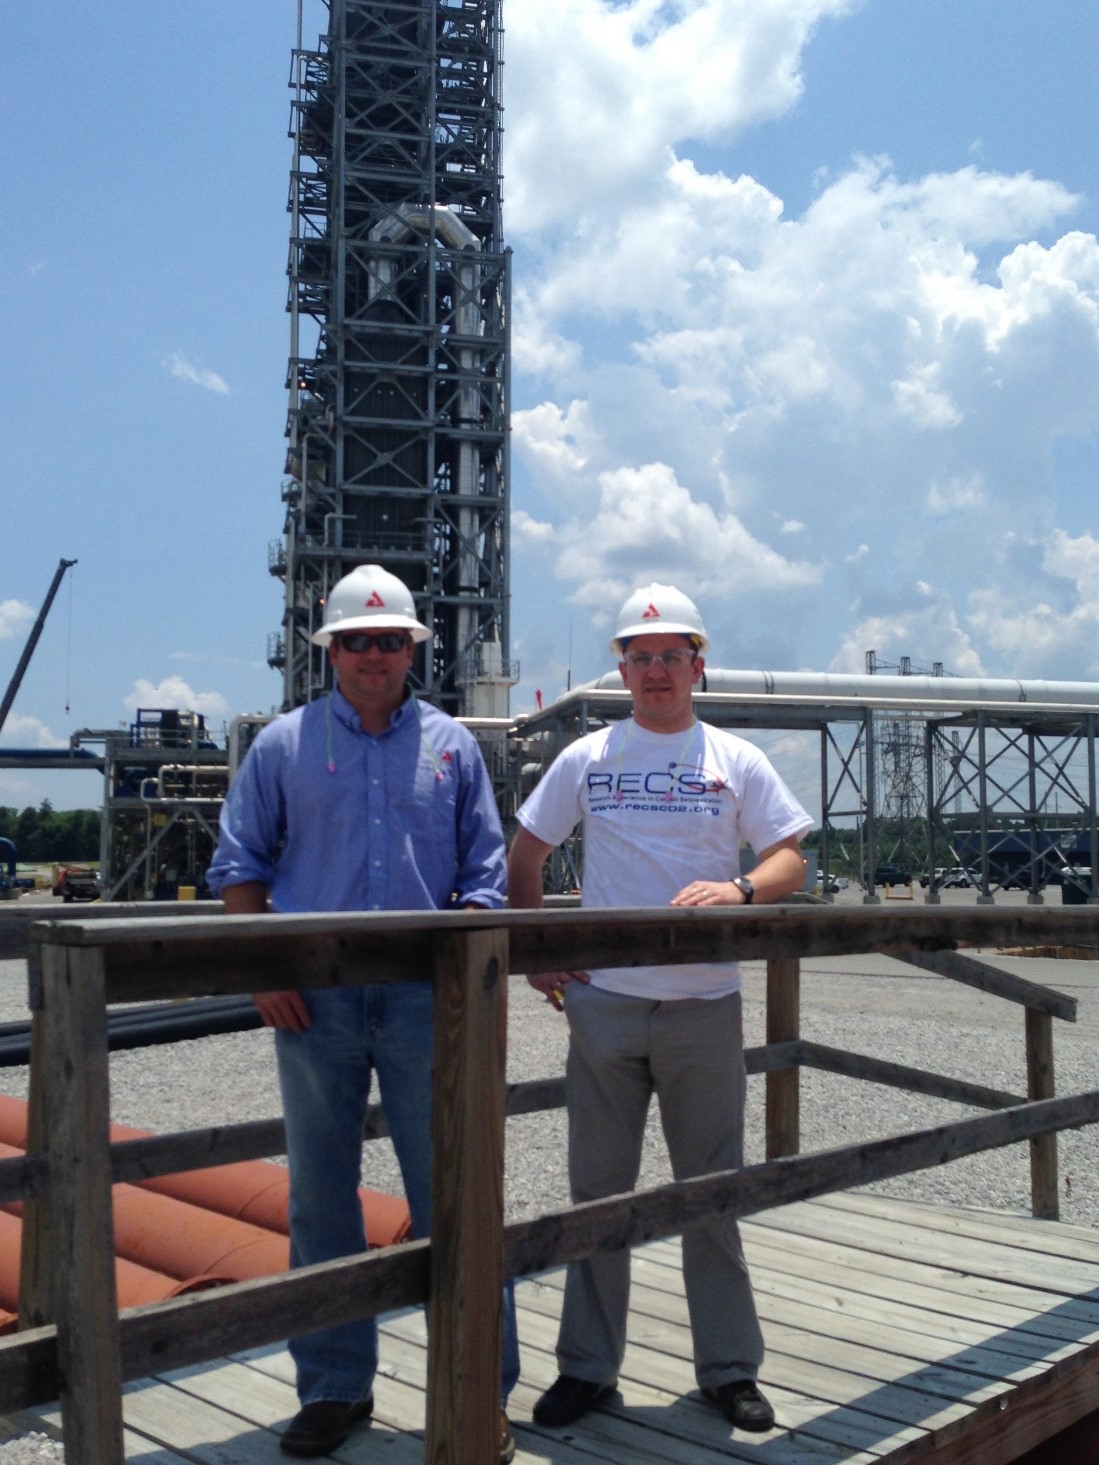 Tomasz (on the right) at the Barry power plant, Alabama